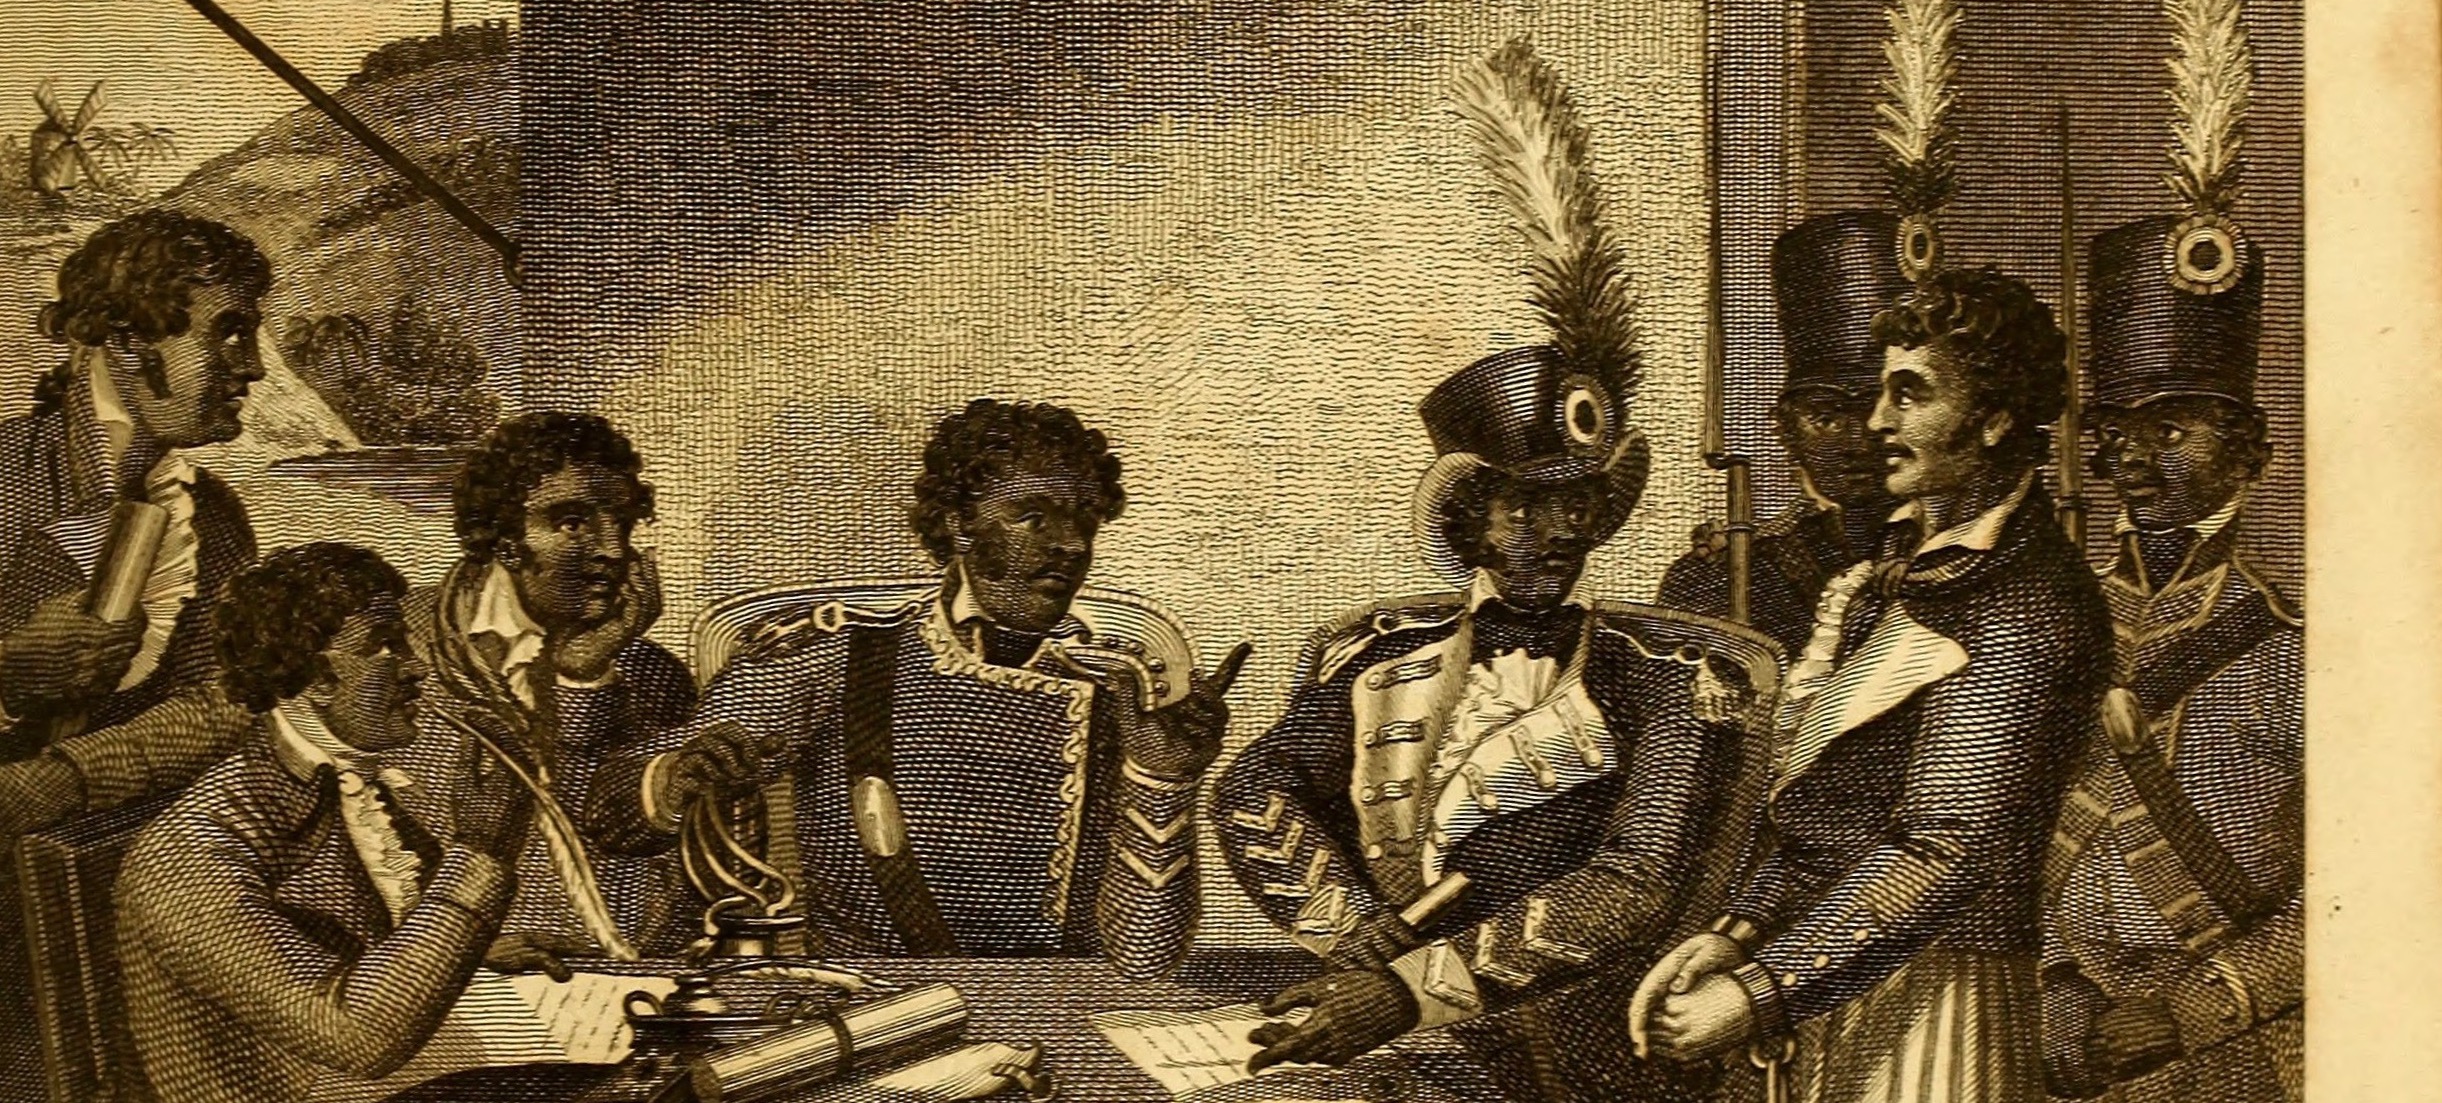 Toussaint L’Ouverture and the Iconography of the Haitian Revolution